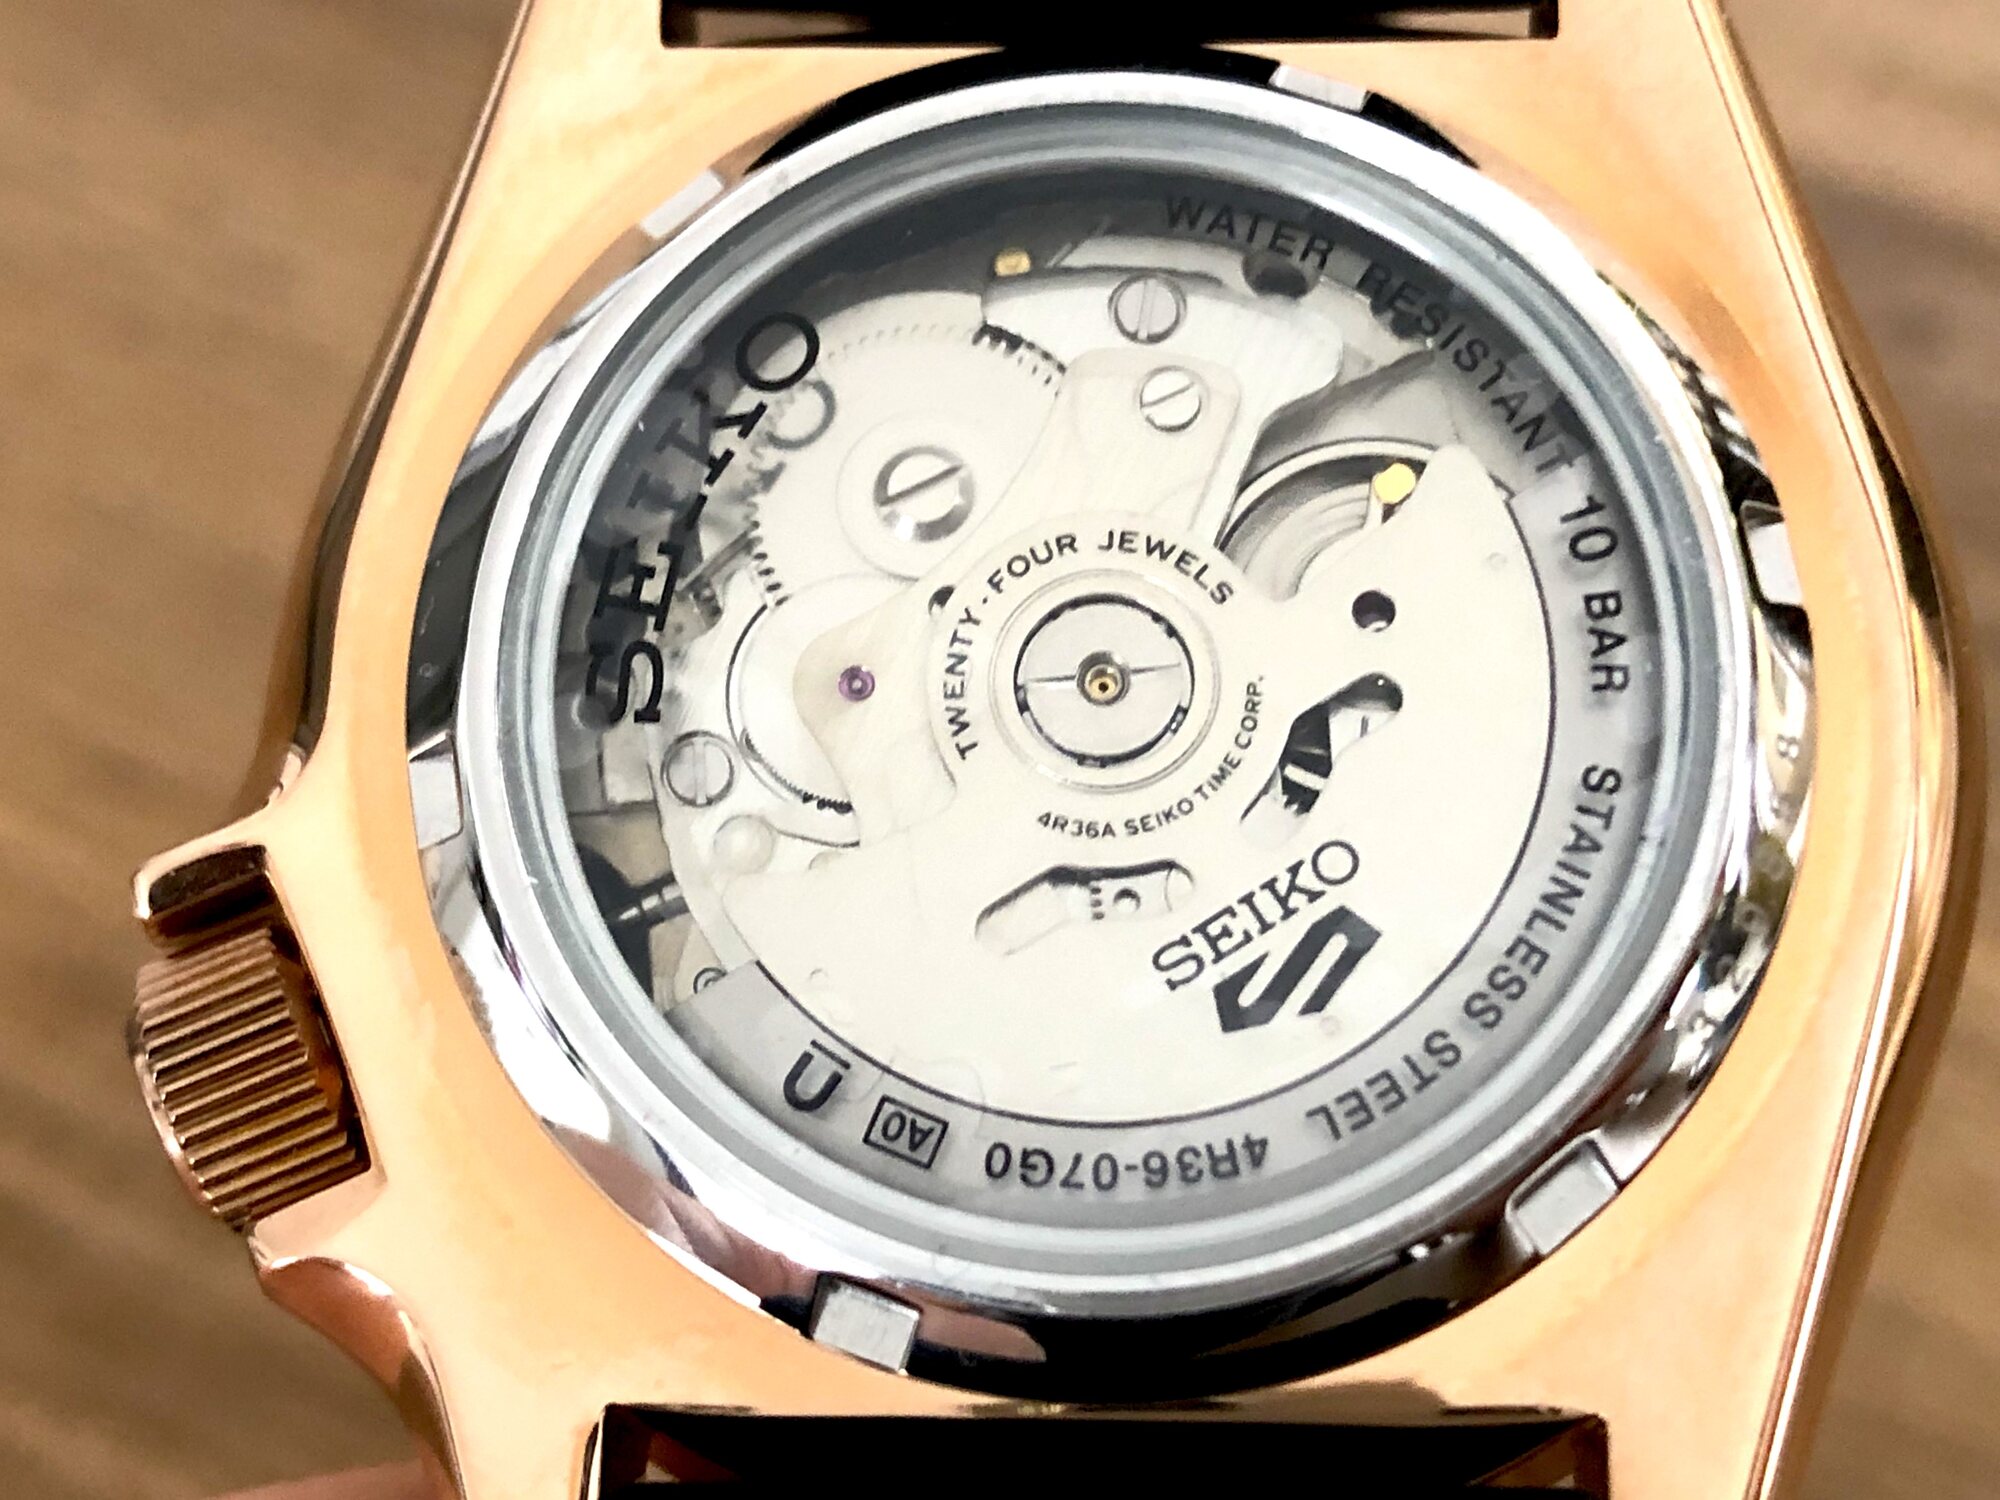 Transparent caseback with gears and wheels visible